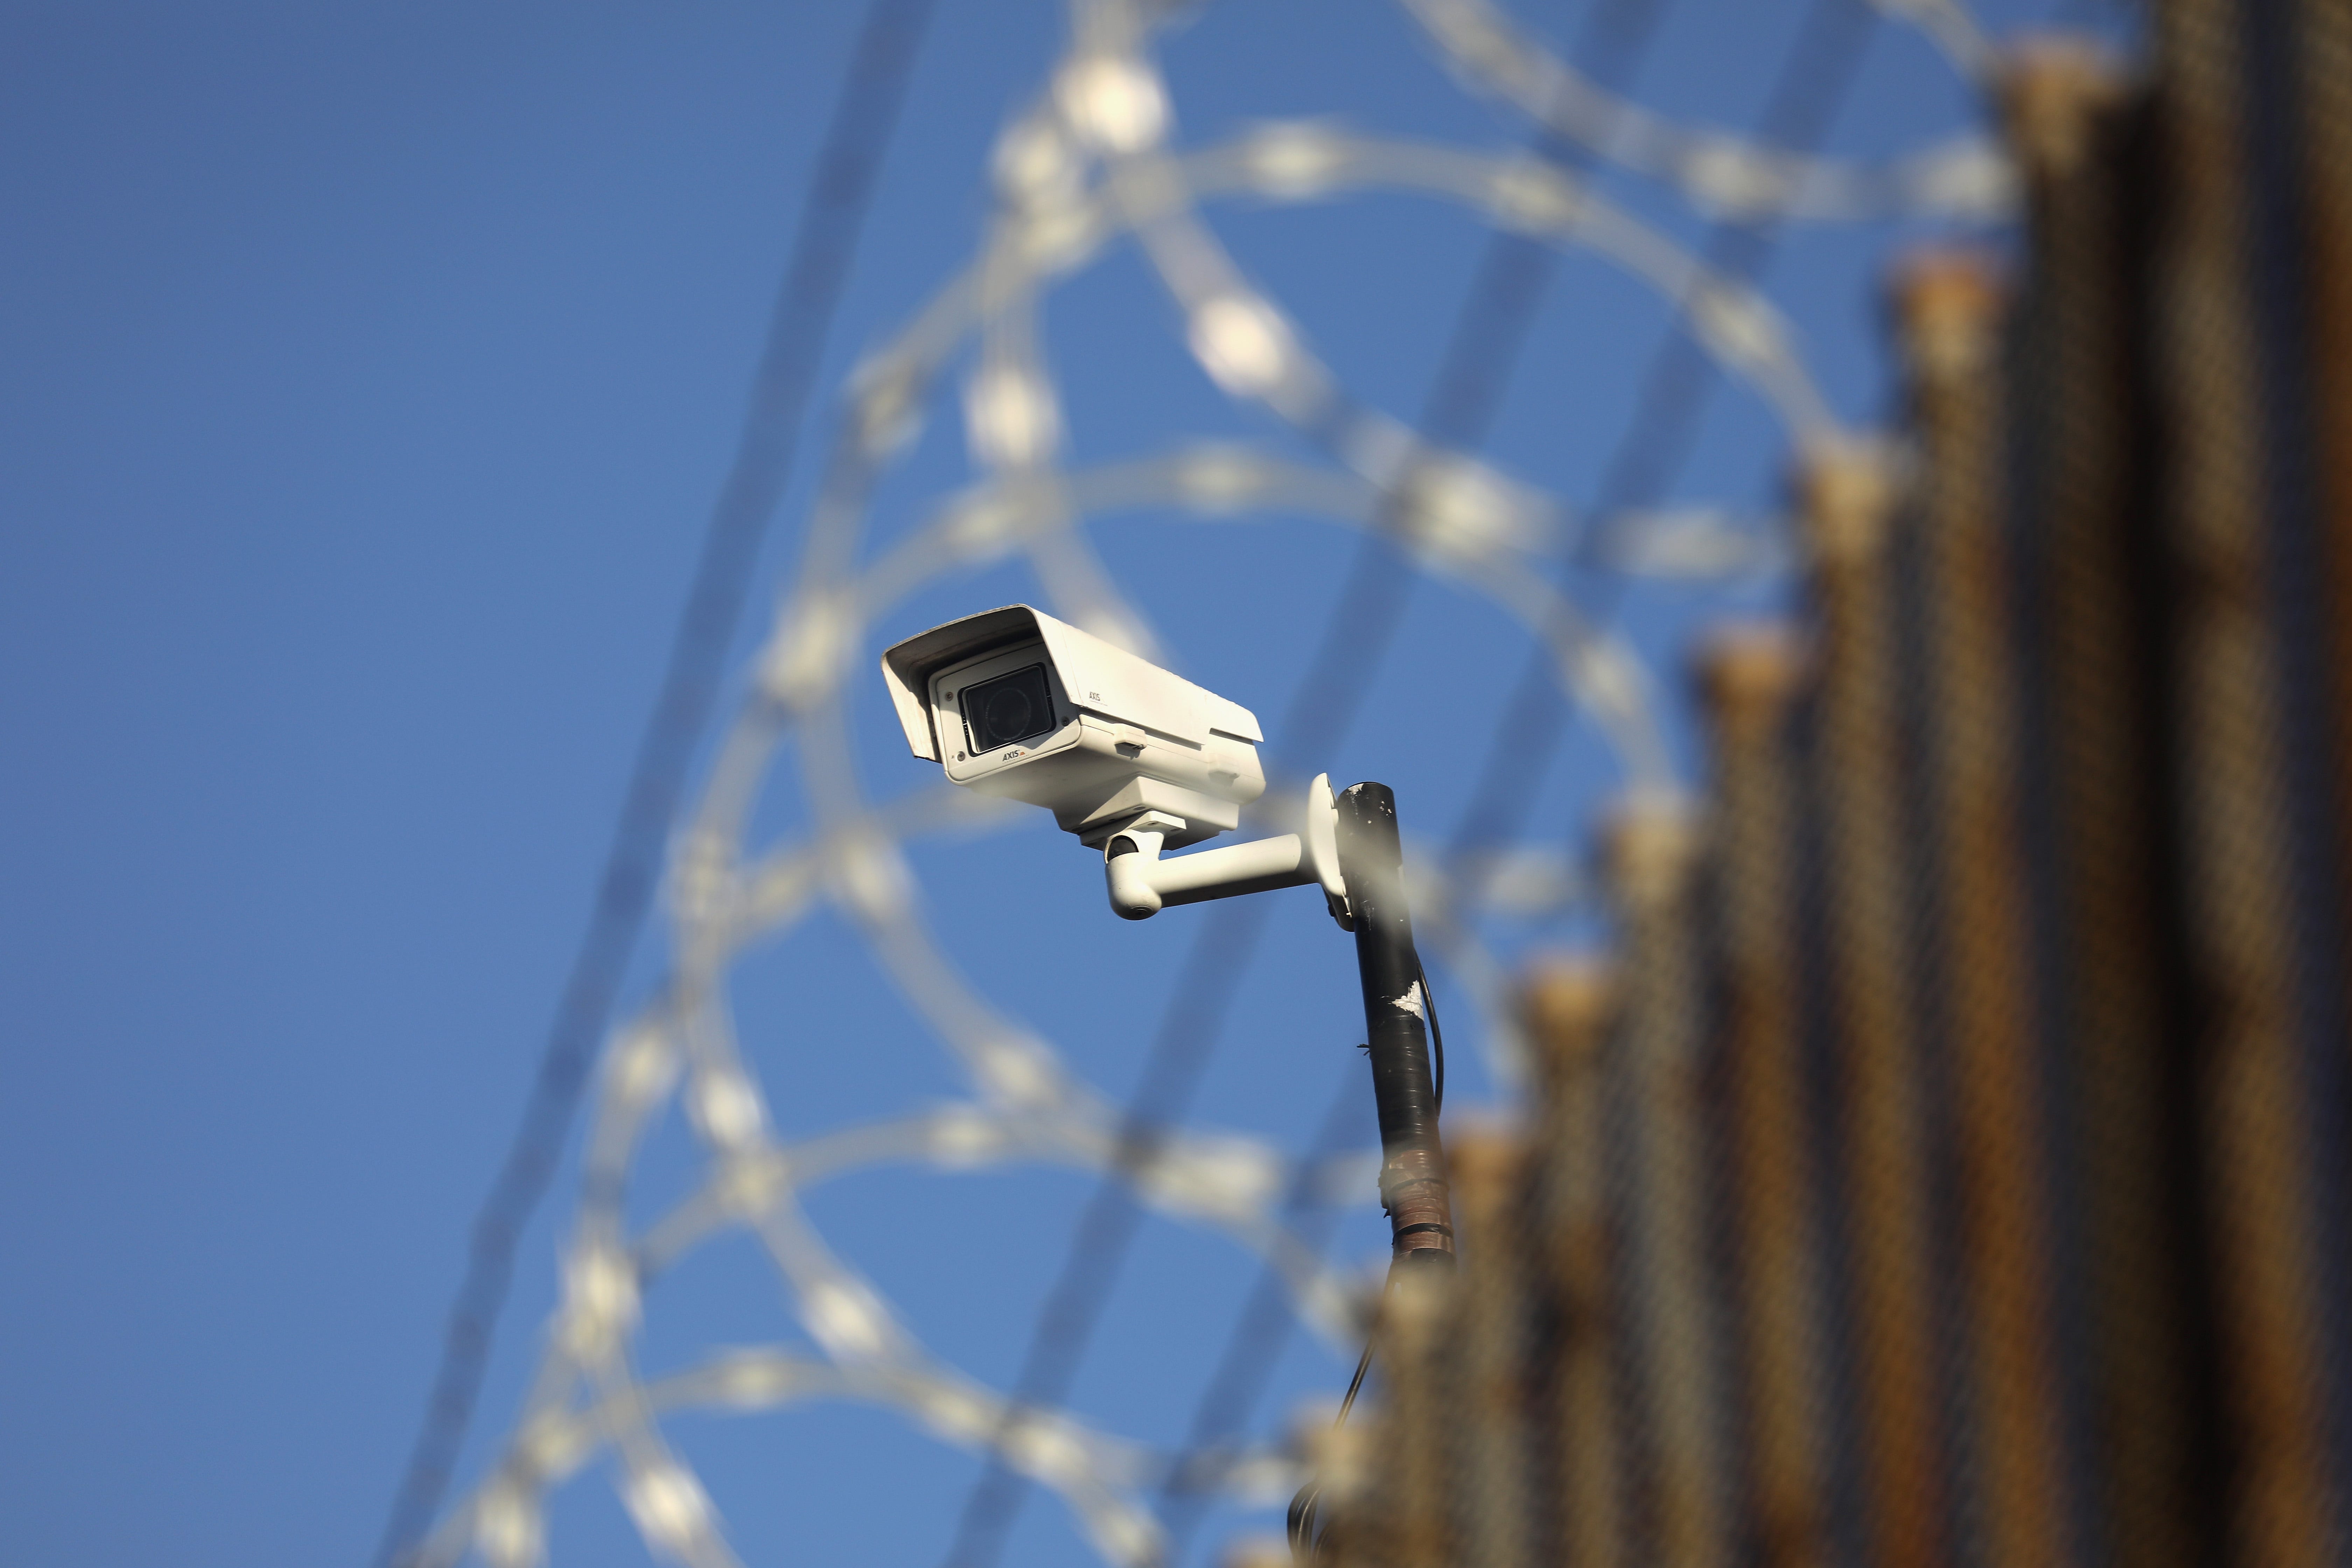 A U.S. surveillance camera overlooks the international bridge between Mexico and the United States.